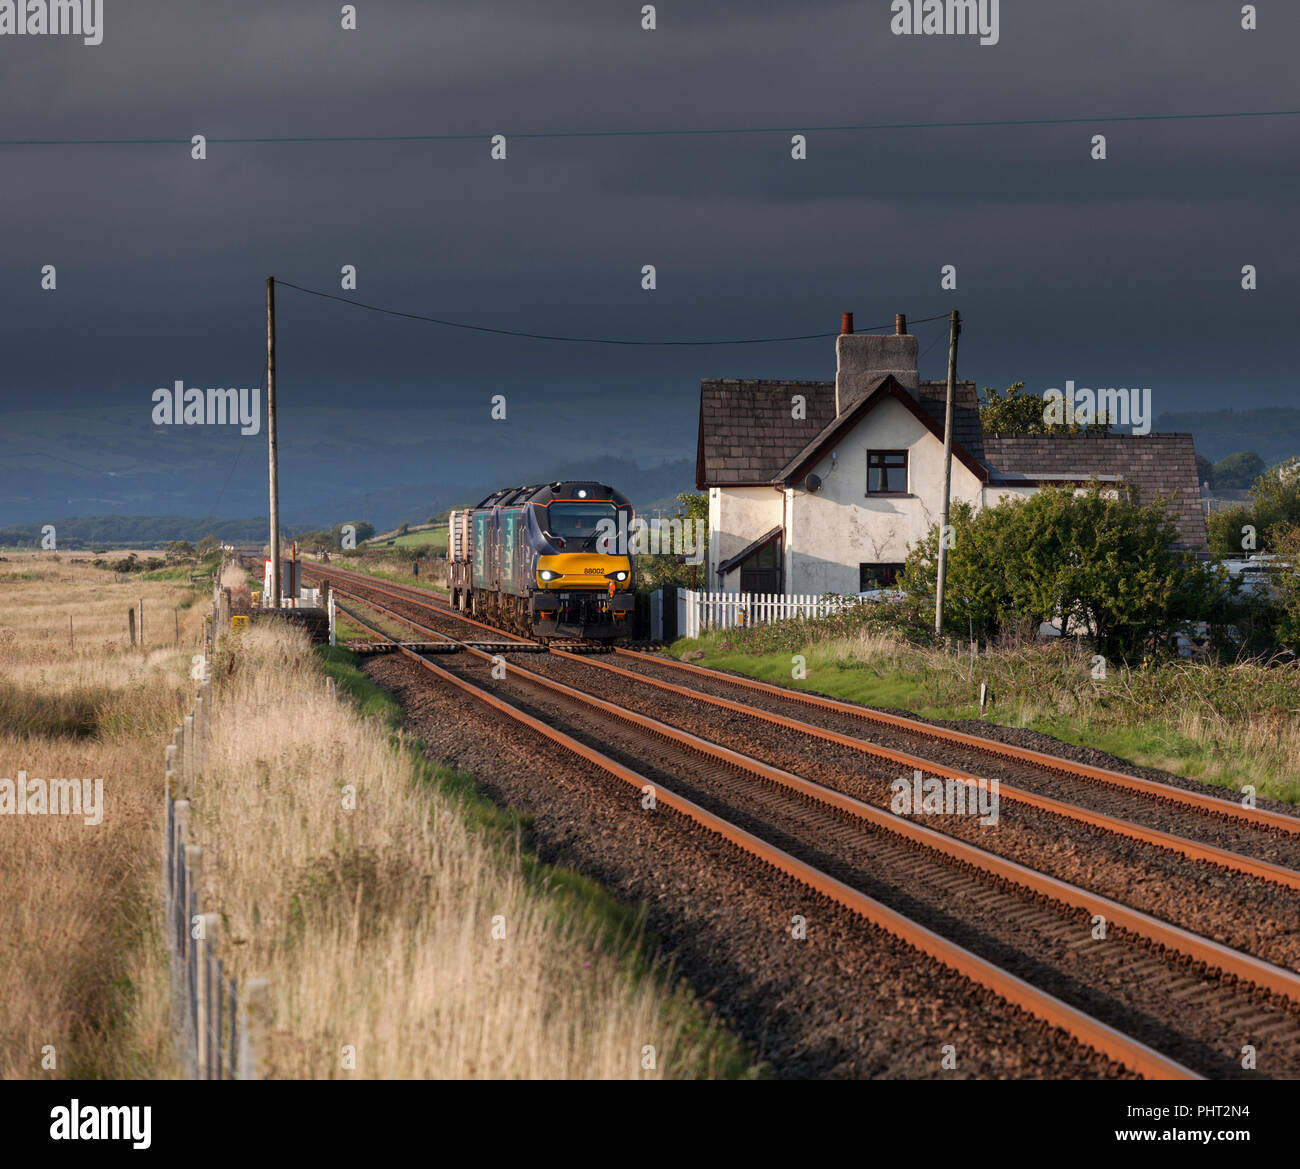 2 Direct Rail Services class 88 bi mode electric & Diesel locomotives on the Cumbrian coast line with a  Sellafield - Crewe nuclear flask train Stock Photo